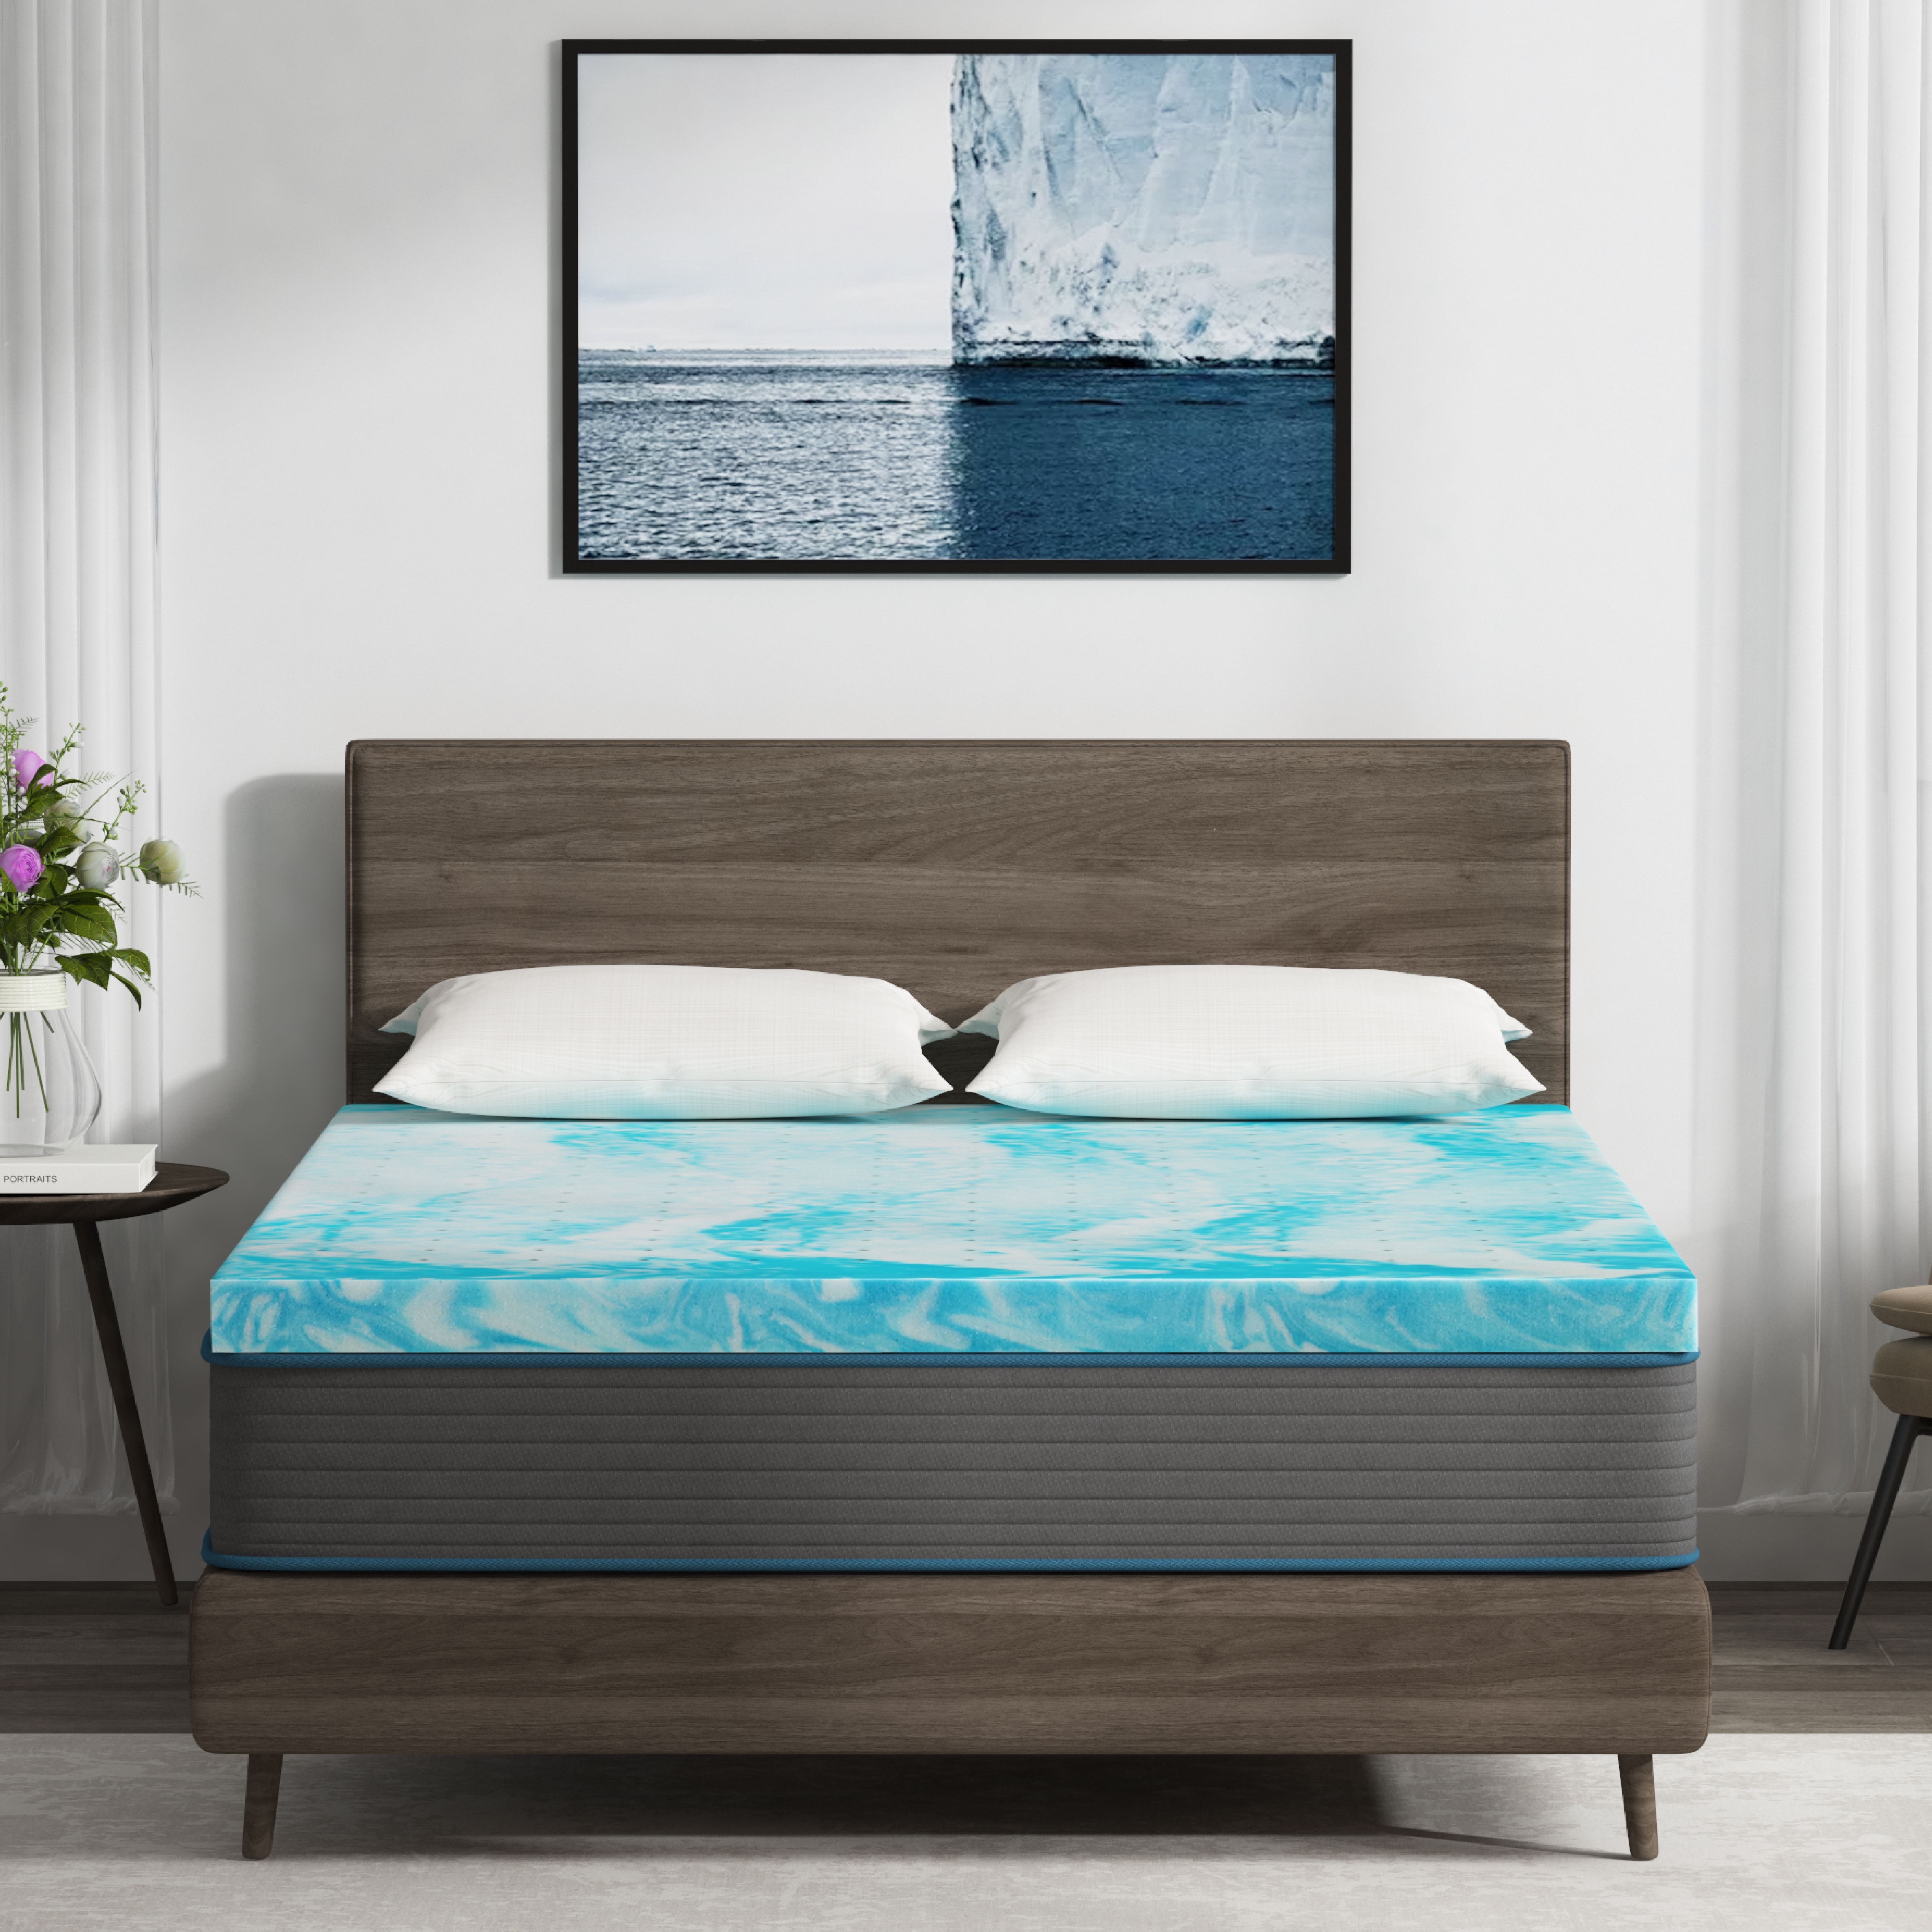 Lucid Comfort Collection 4 in. Gel and Aloe Infused Memory Foam Topper - King, Blue